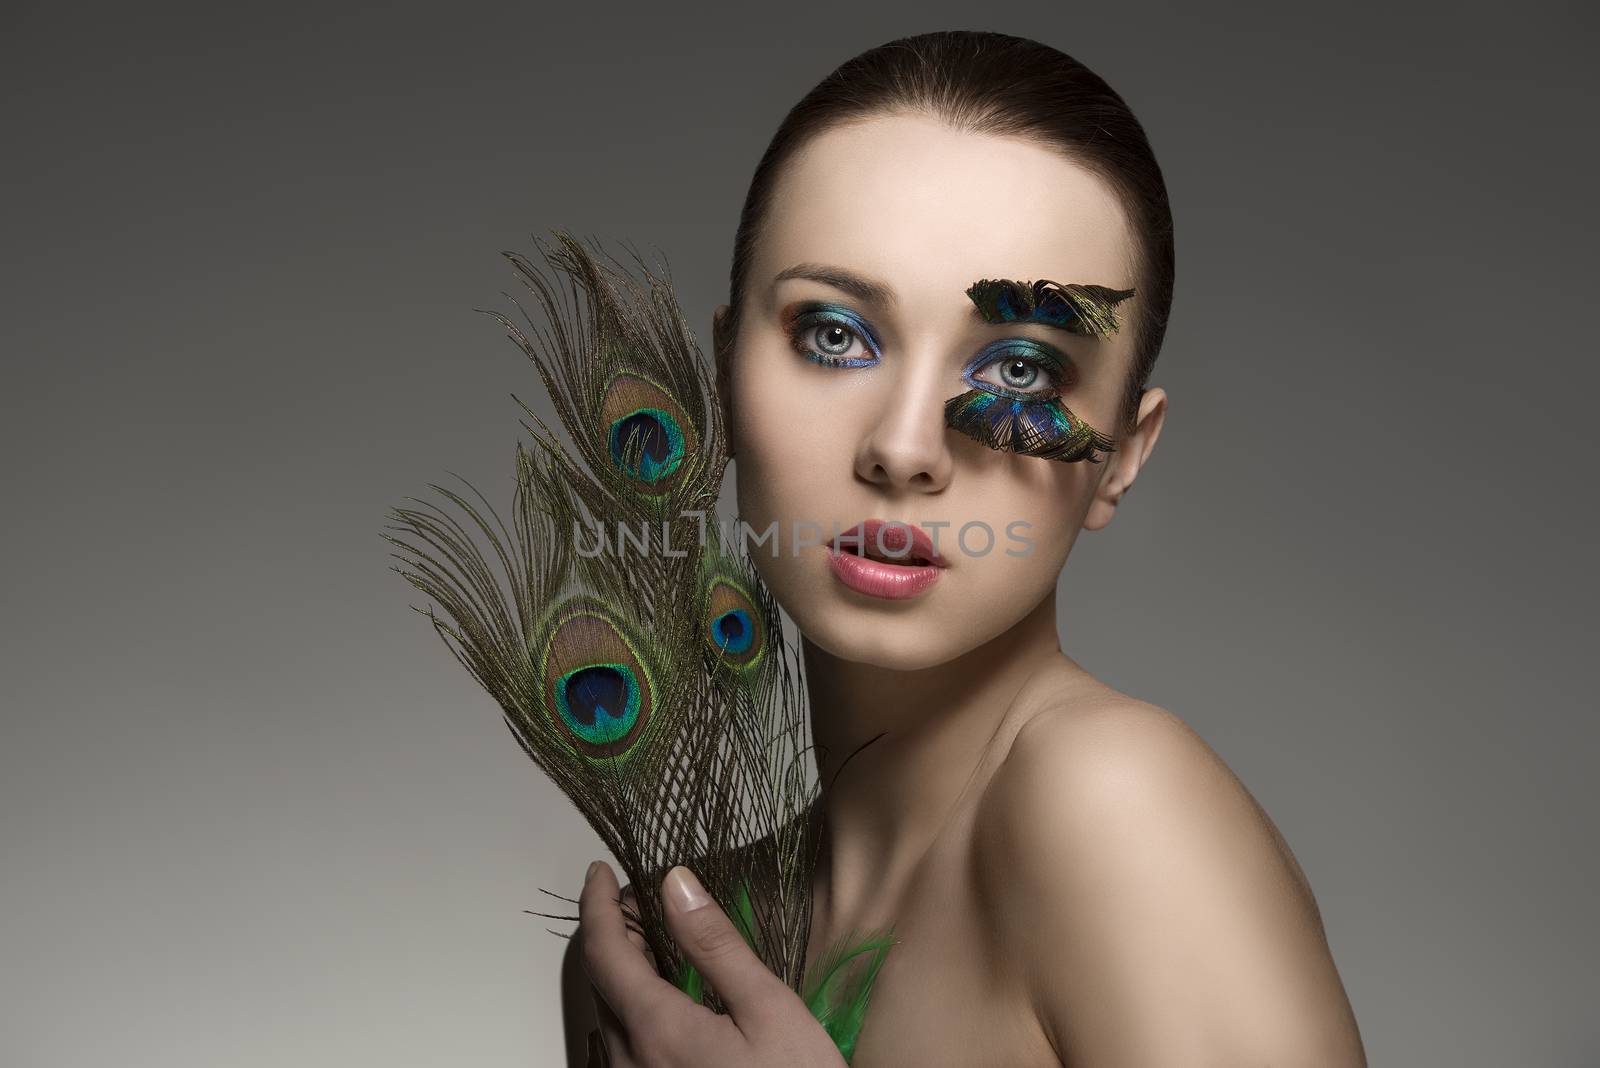 splendid naked brunette woman with make-up and accessory with colored peacock feathers. looking in camera